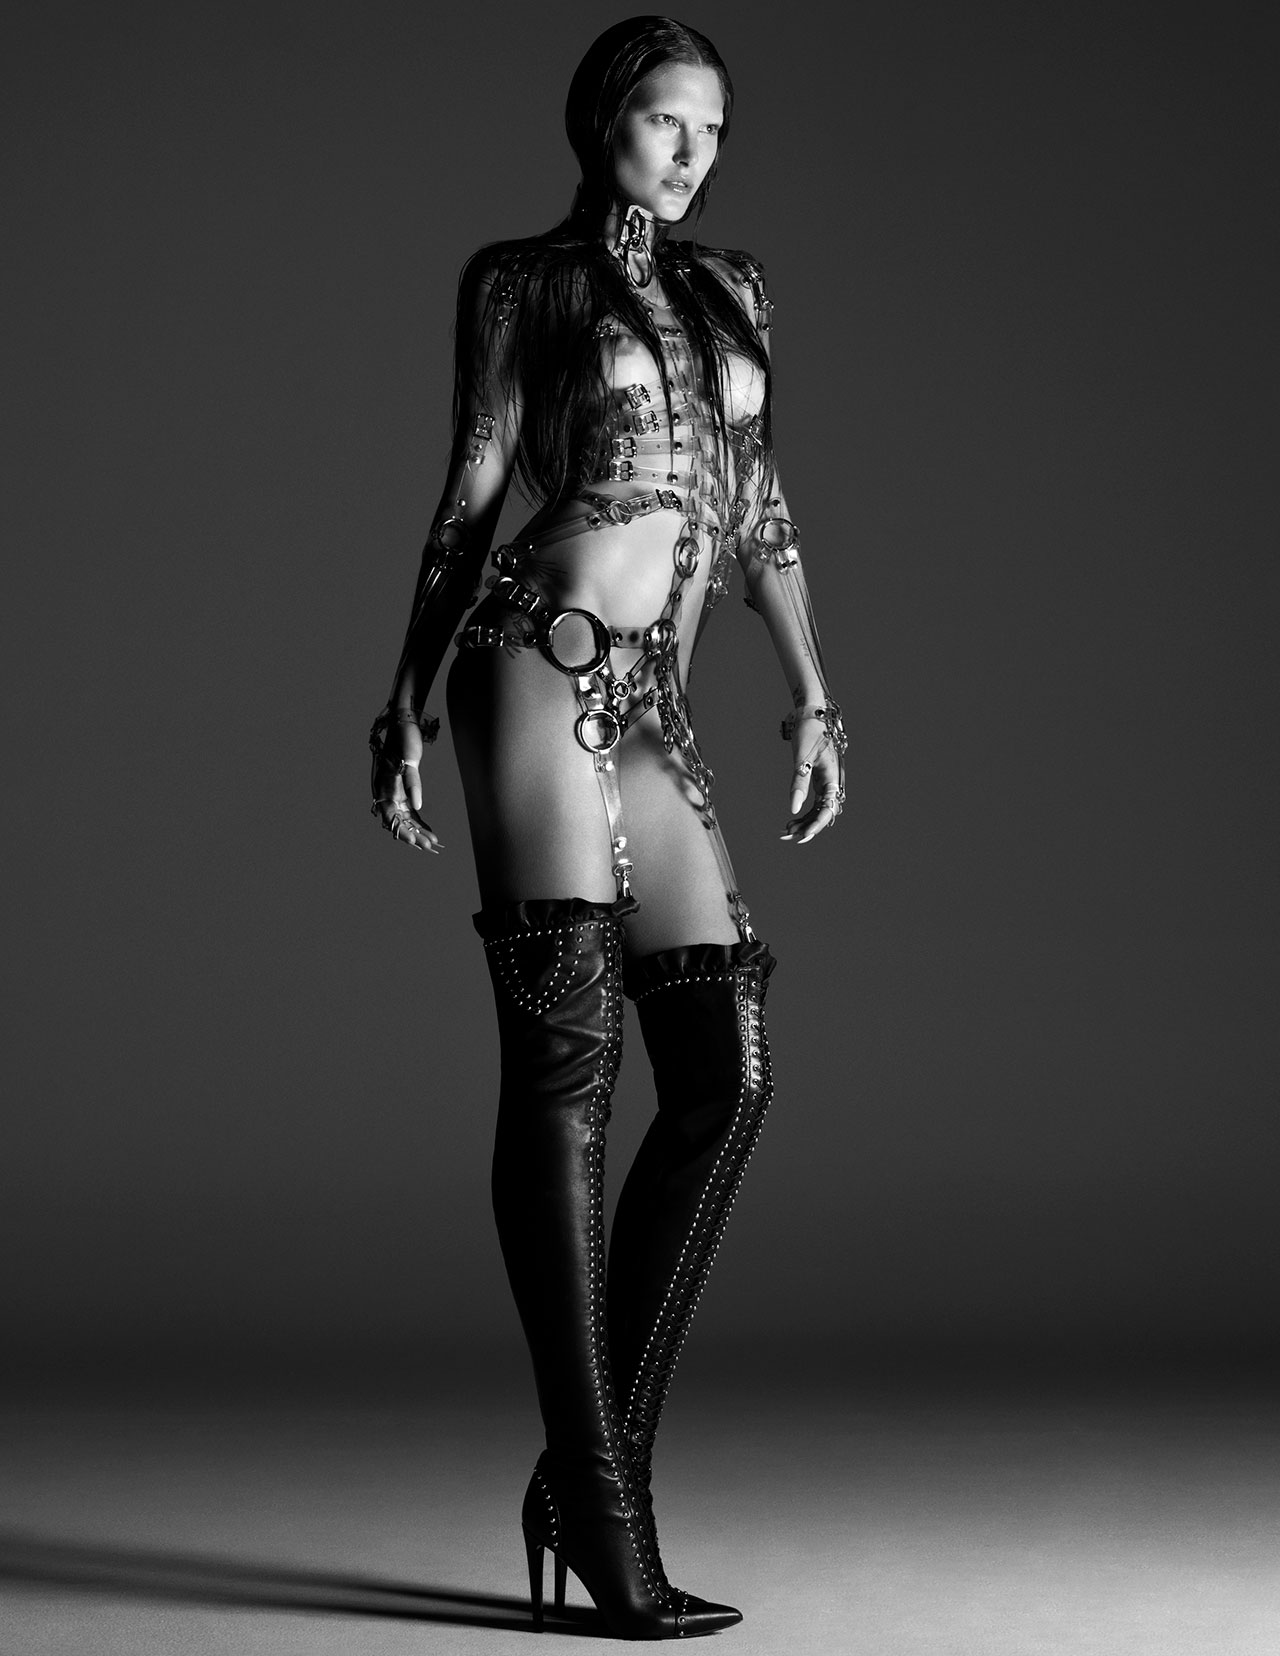 Catherine McNeil by Tim Richardson for Models.com Icons